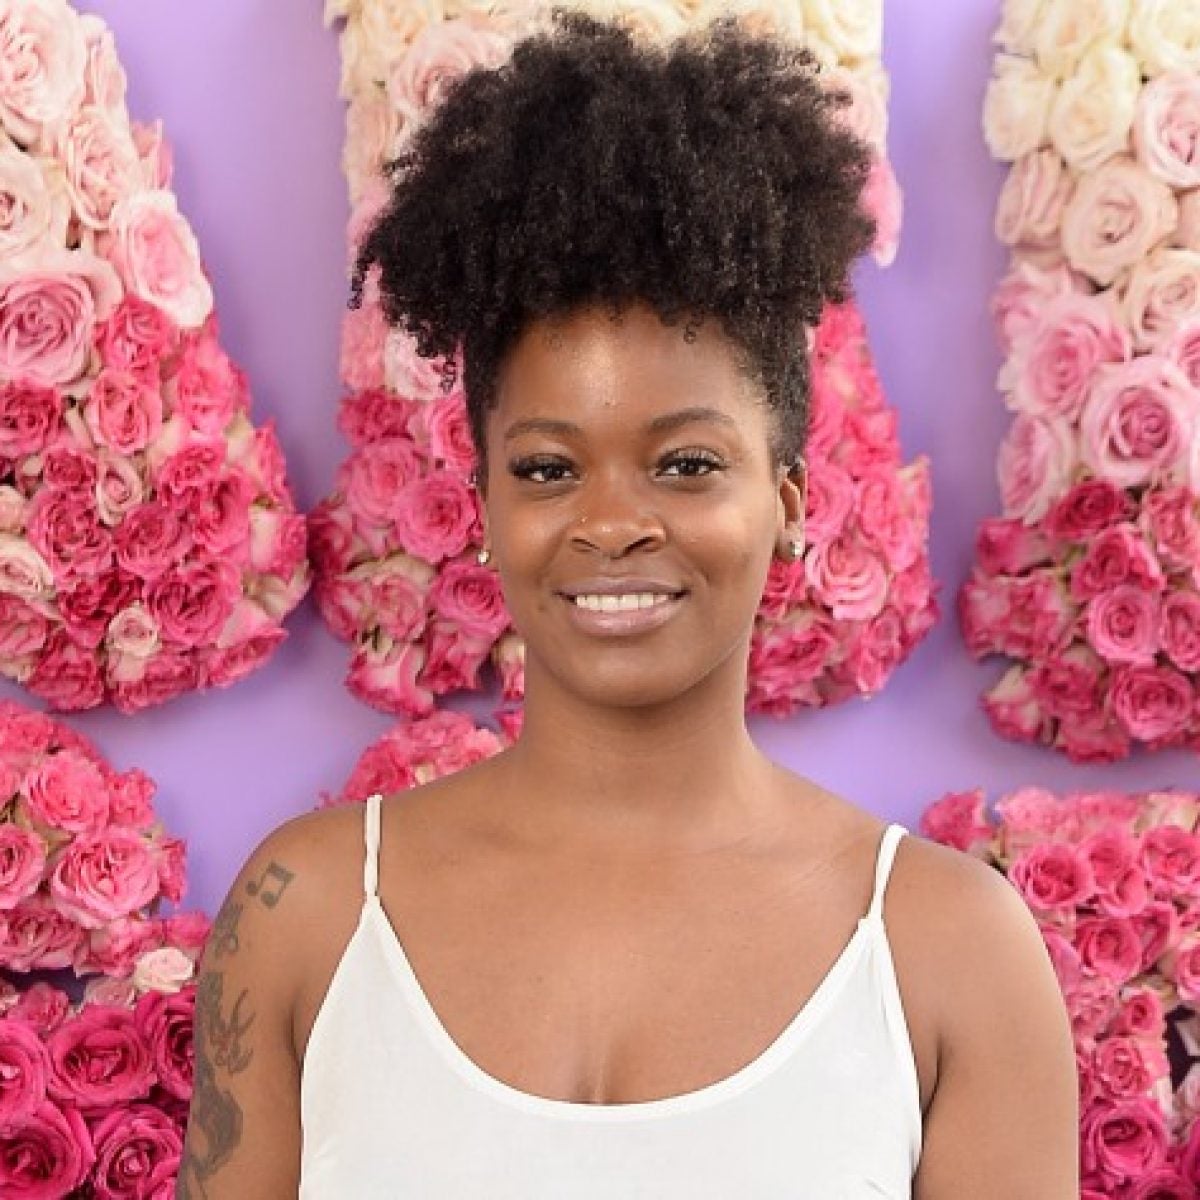 Ari Lennox Serves The Spring Beauty You Need In New 'BUSSIT' Music Video